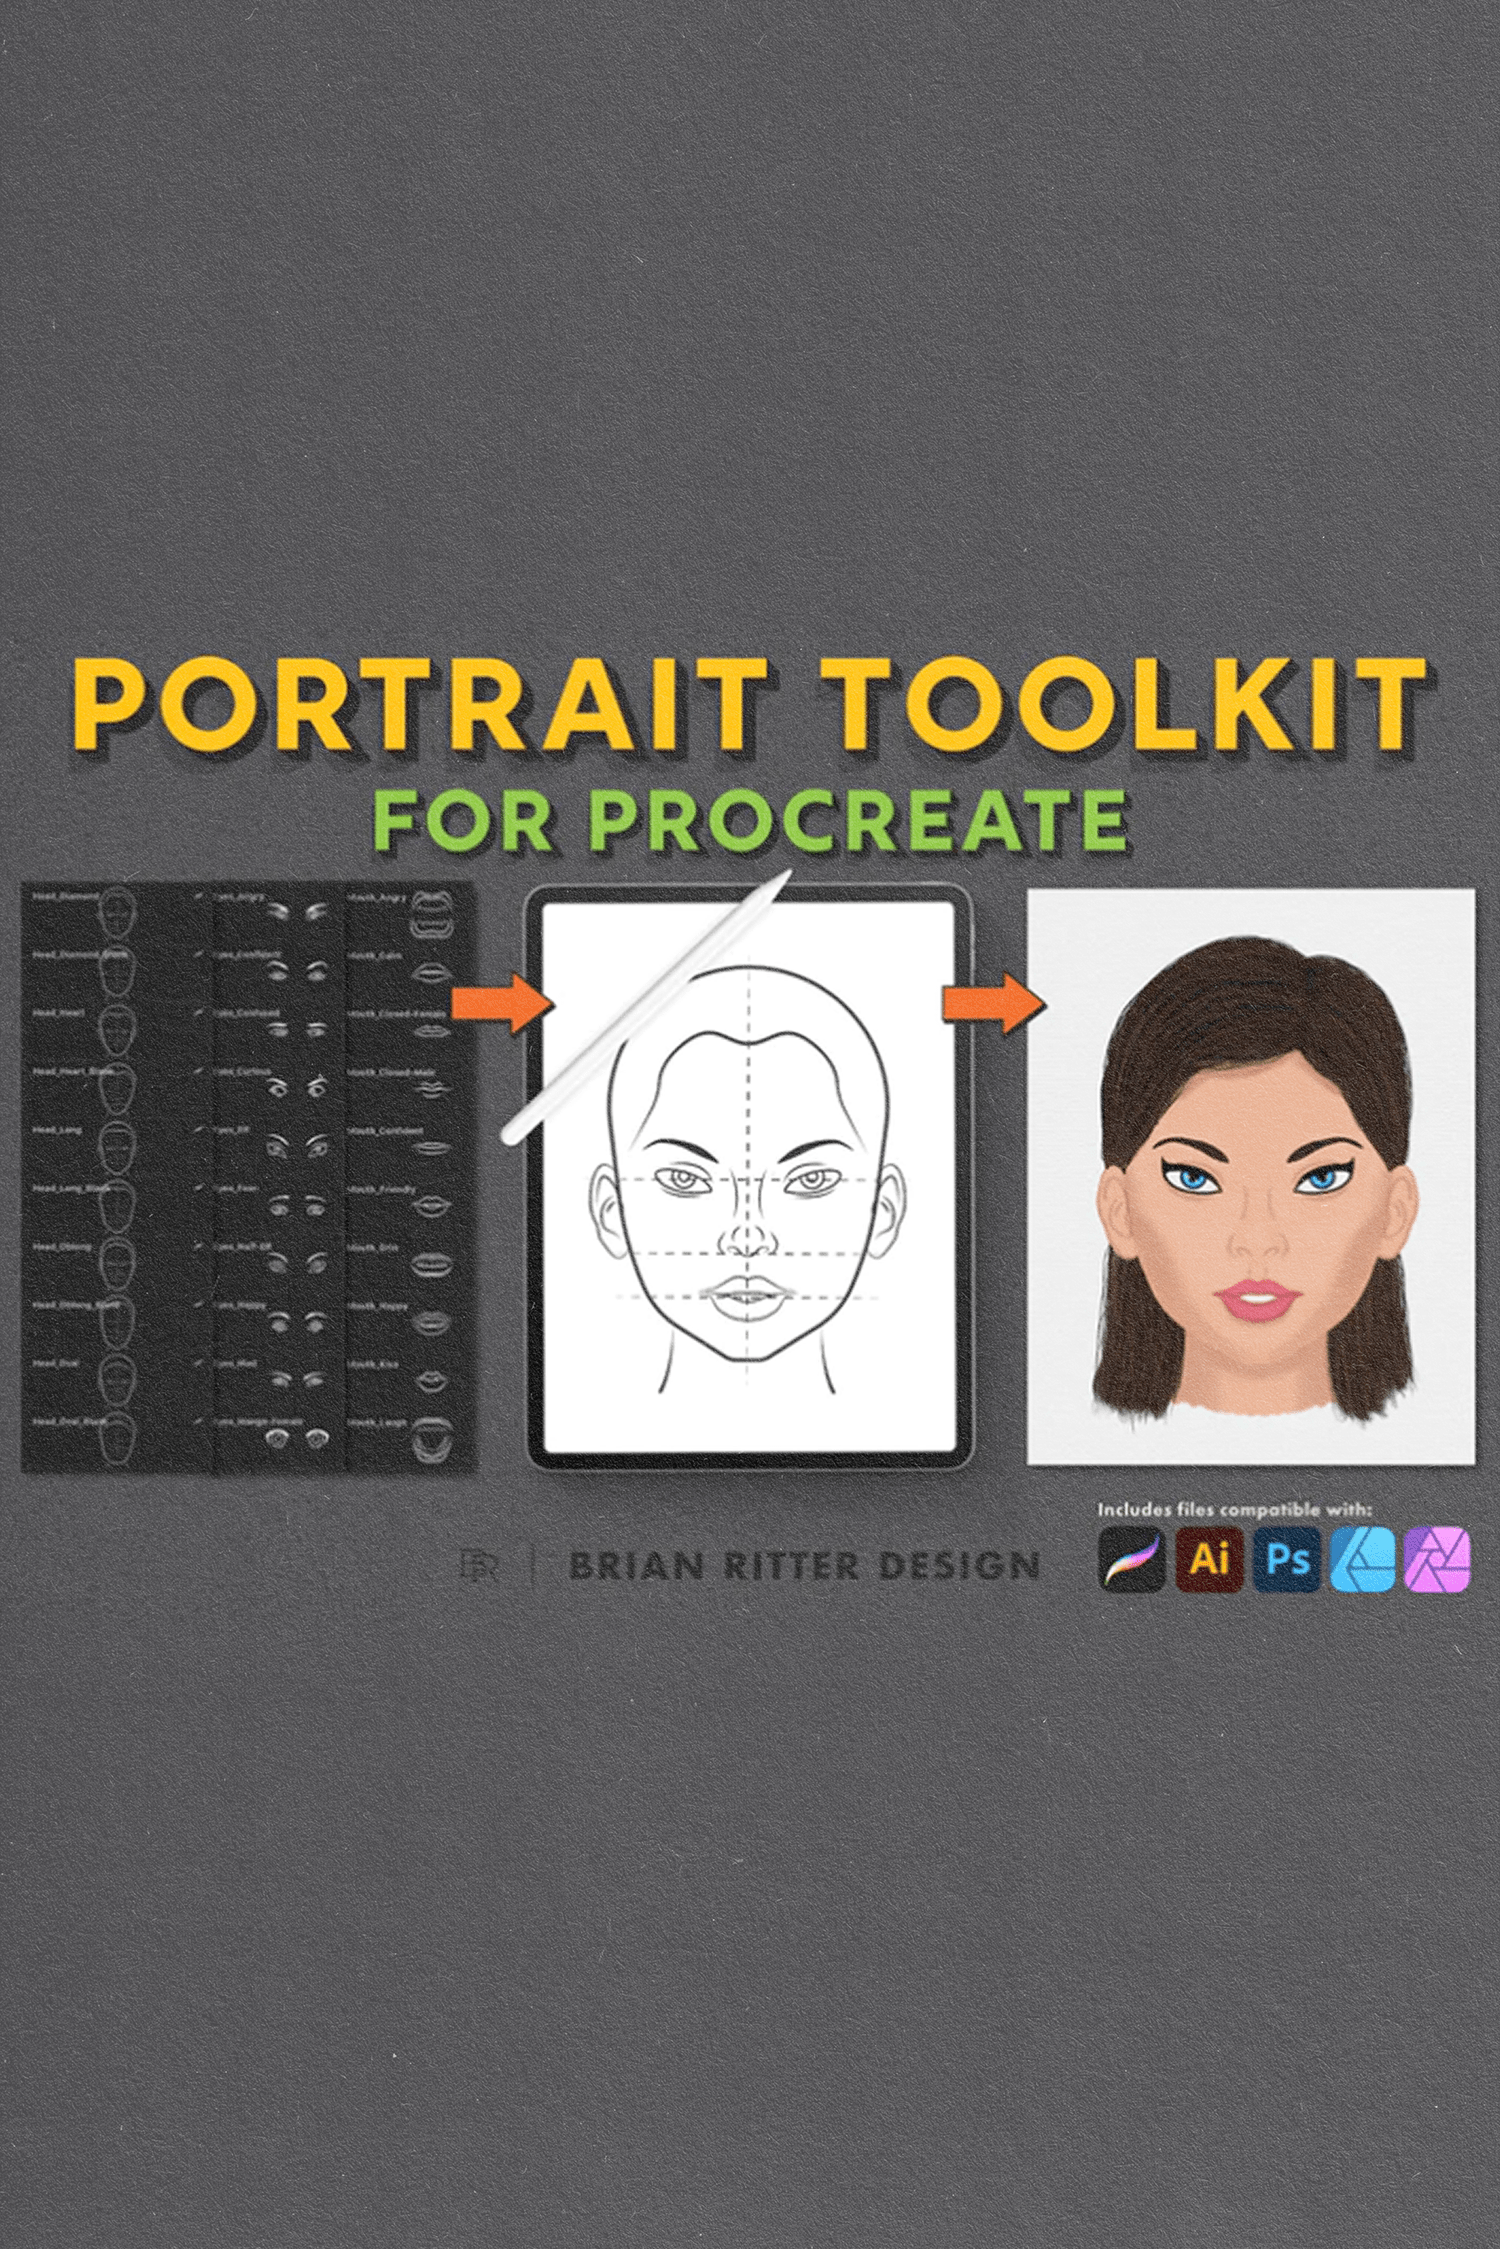 Portrait ToolKit by Brian Ritter Design